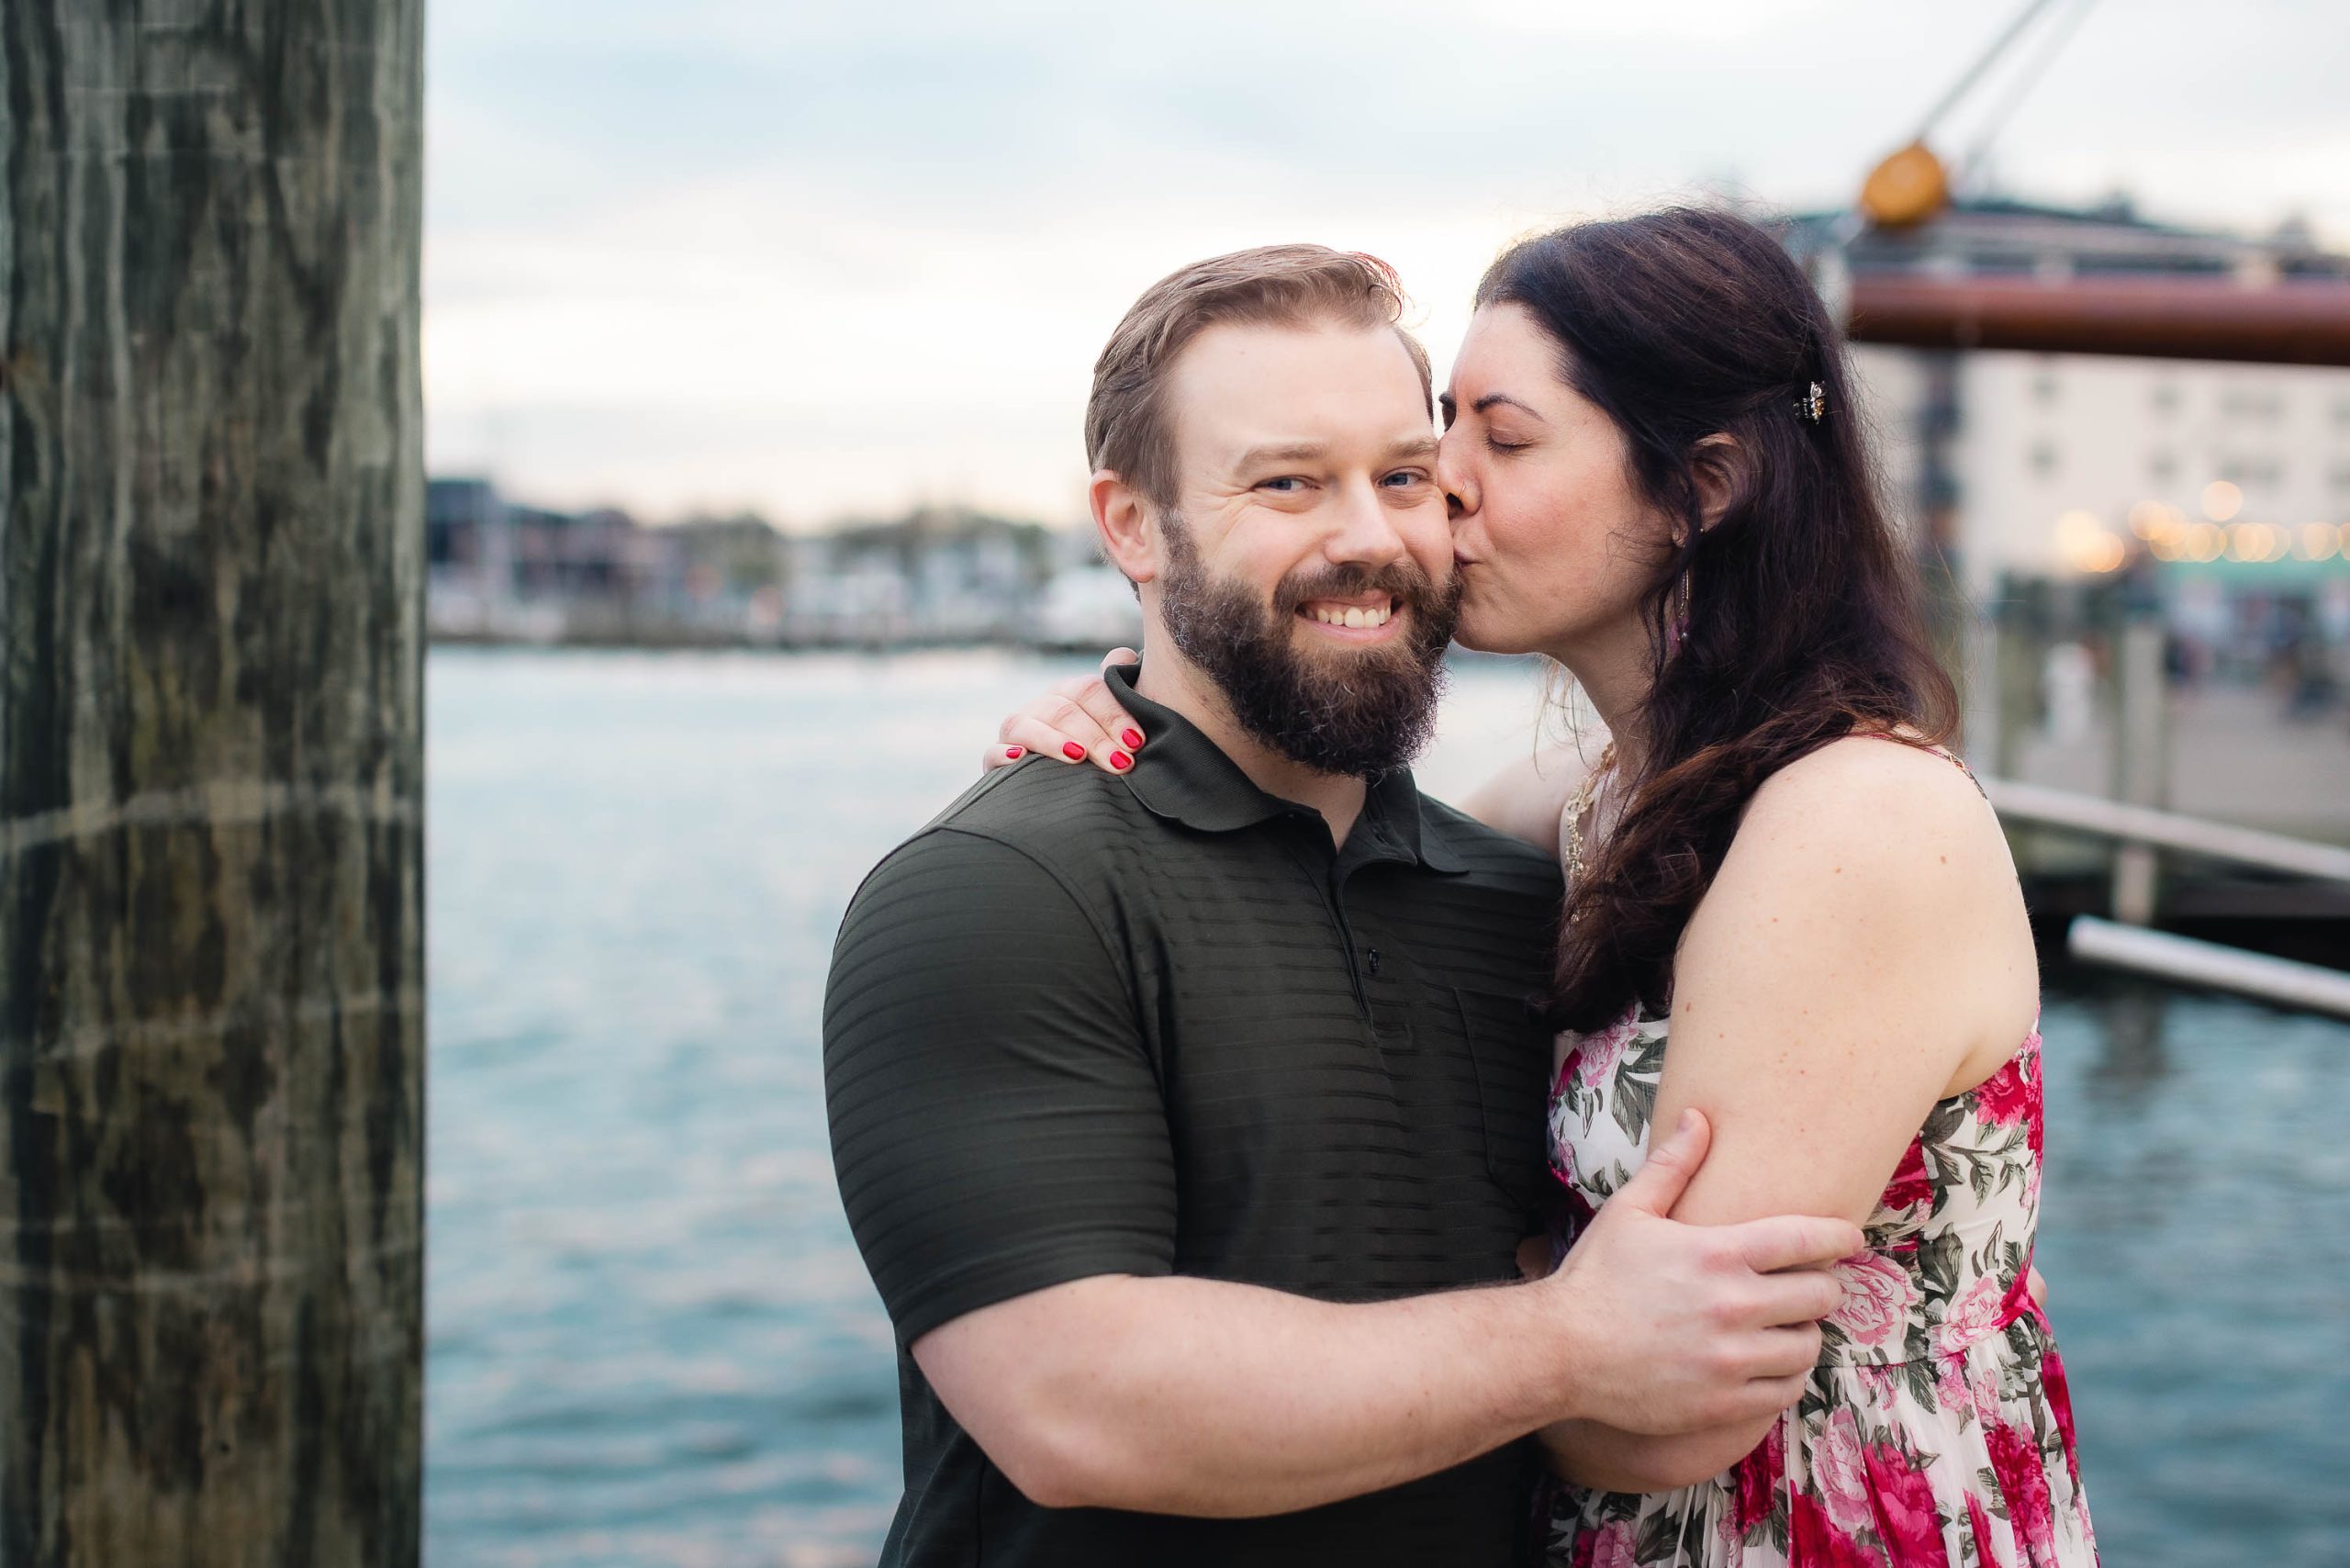 A couple shares a passionate kiss in front of a dock during their downtown Annapolis engagement photoshoot.